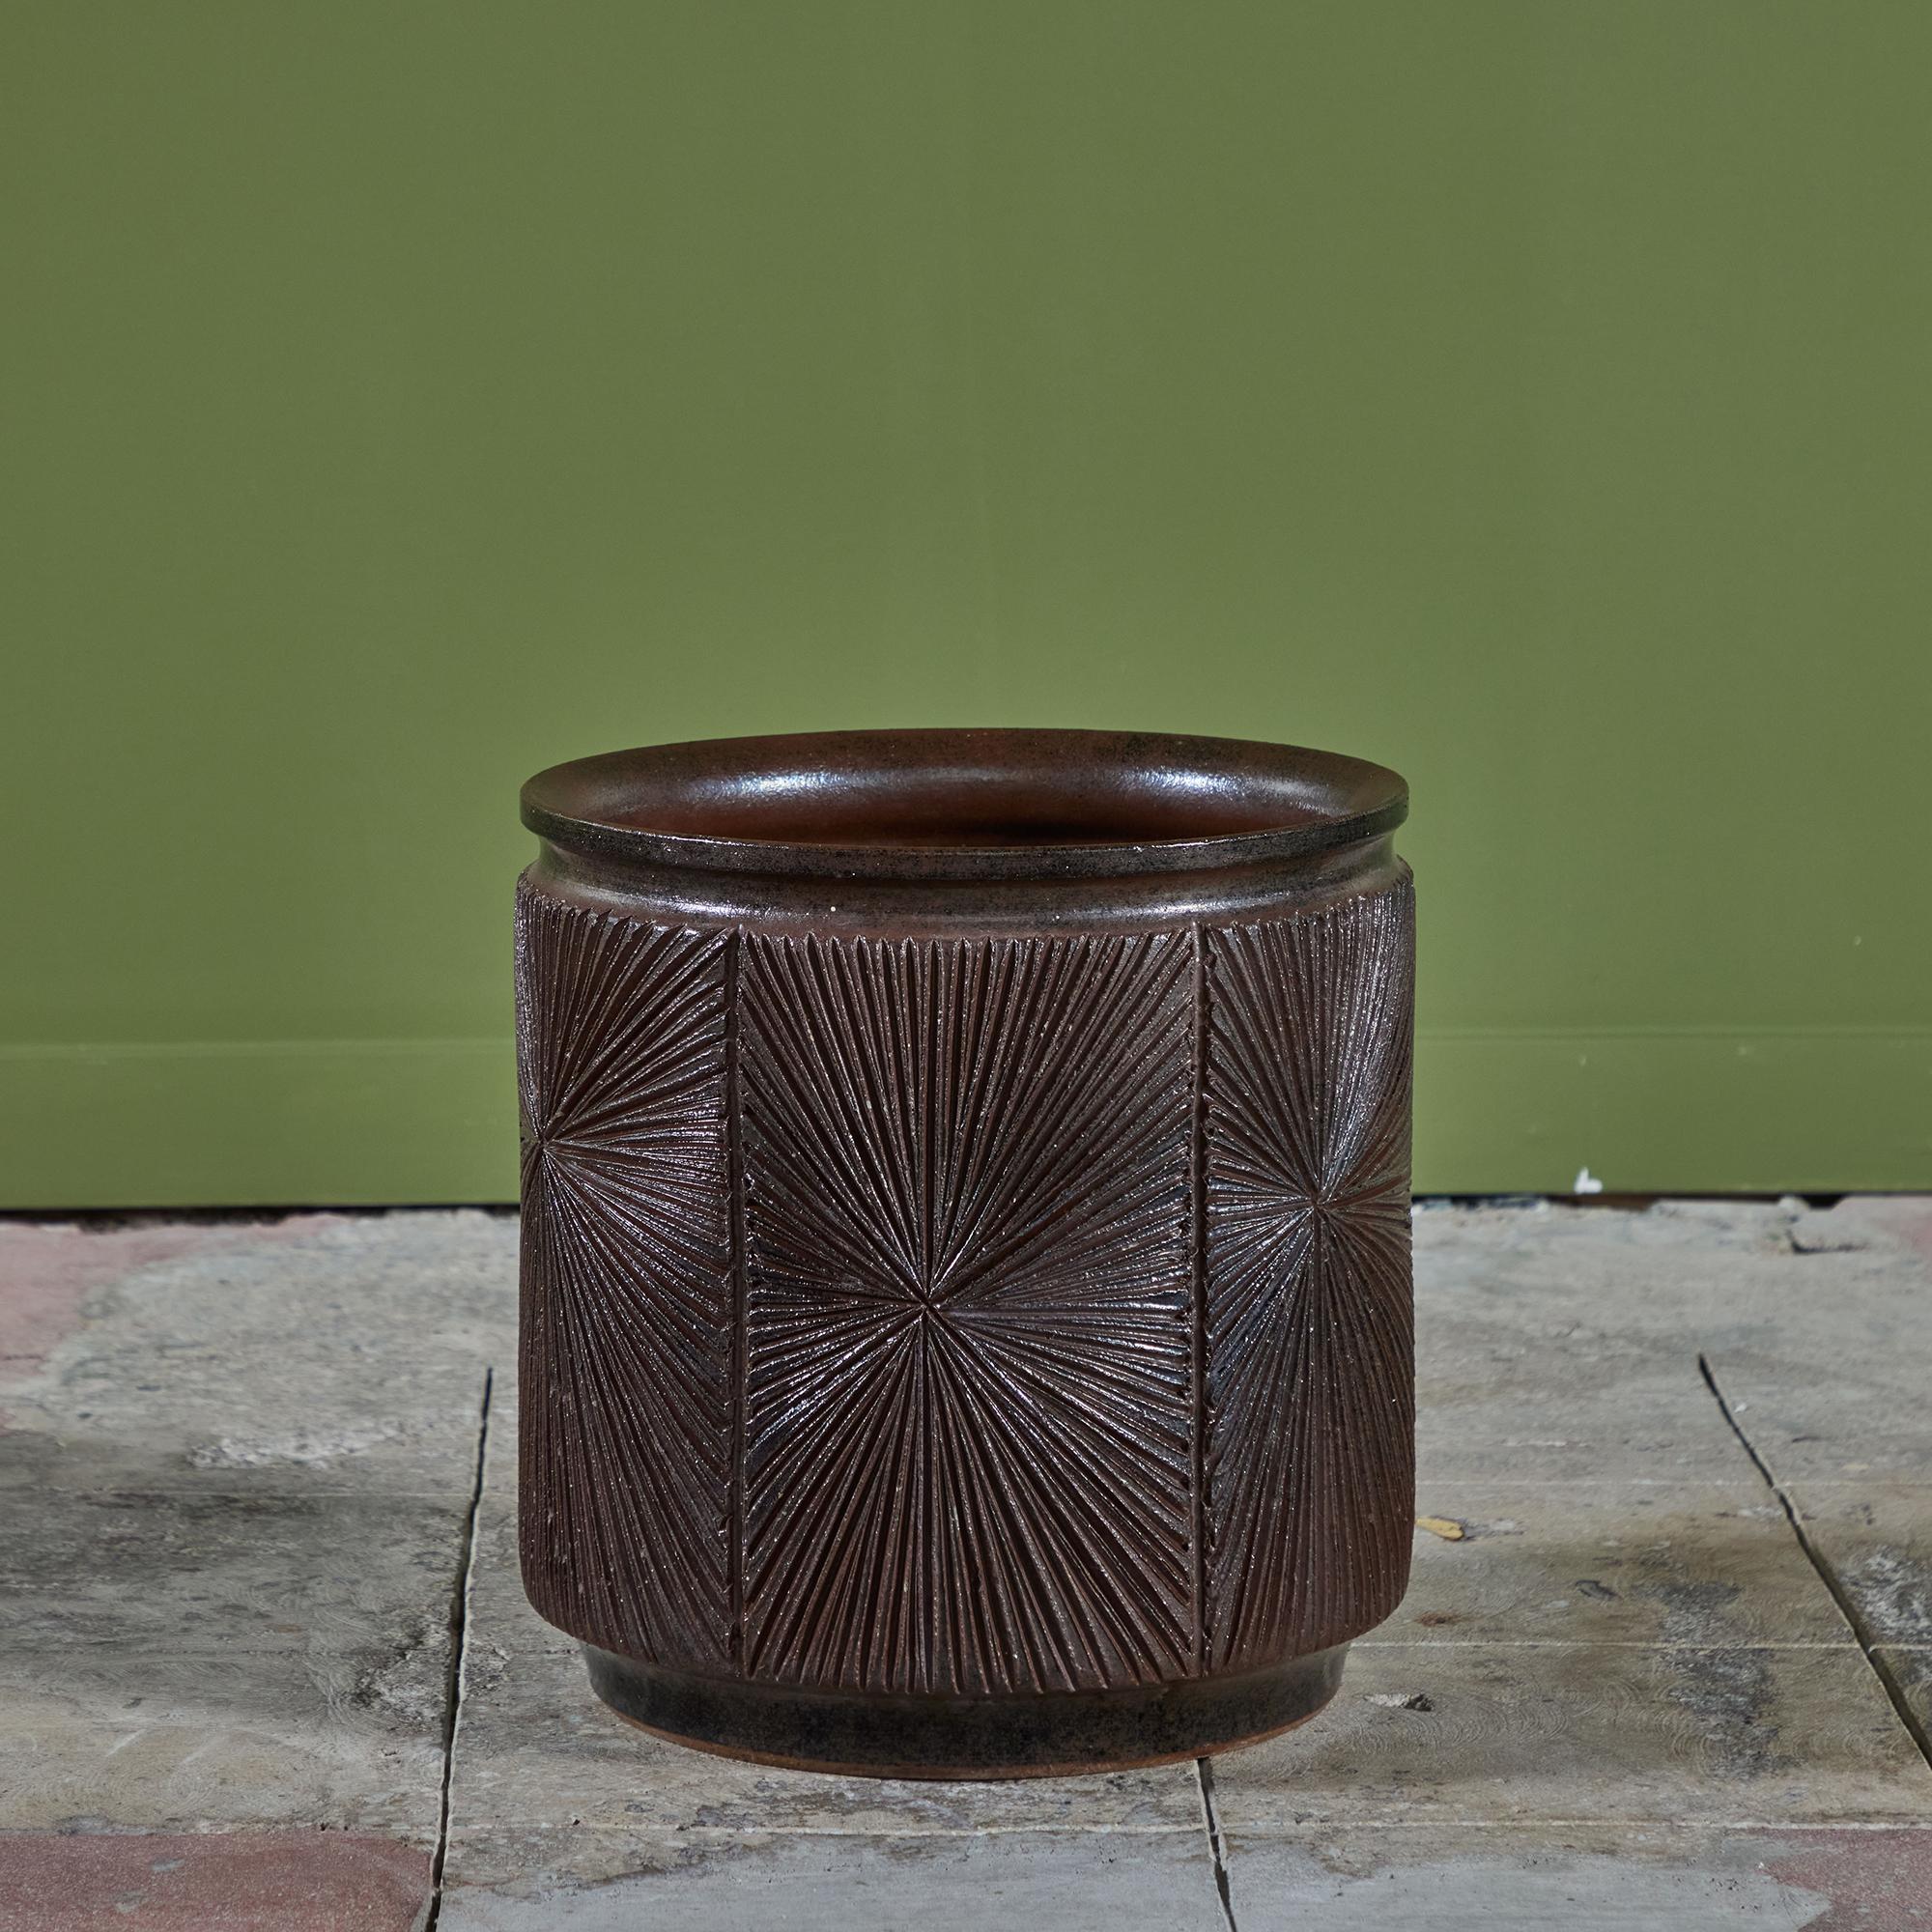 A cylindrical stoneware planter from Robert Maxwell and David Cressey's 1970s collaboration Earthgender. The planter has a rounded lip and an incised all-over sunburst pattern. The interior and exterior of the planter are covered in a dark brown and